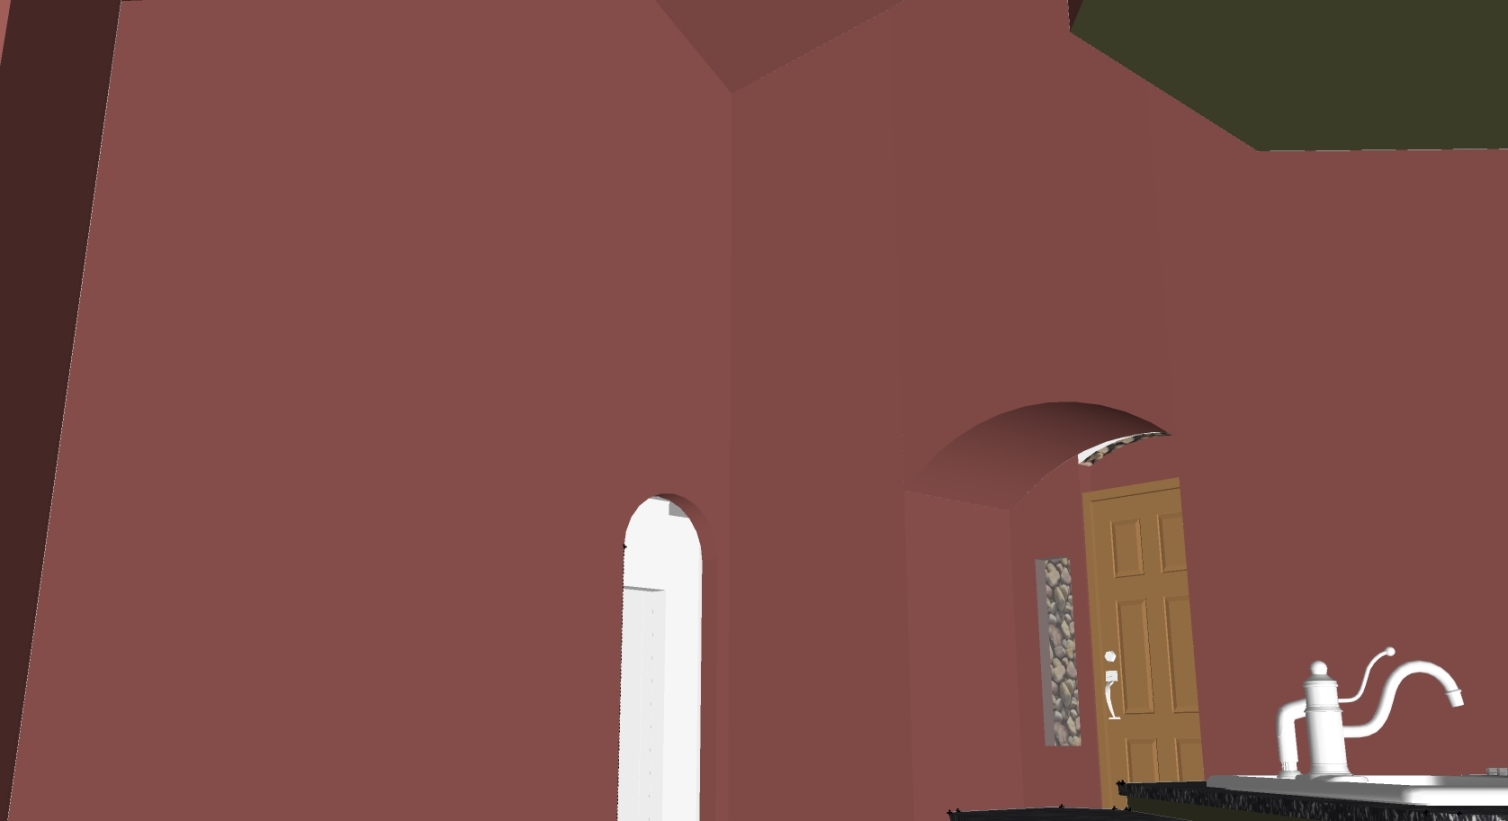 The living room of the house. Ceilings are very tall and walls are reddish-pink :D